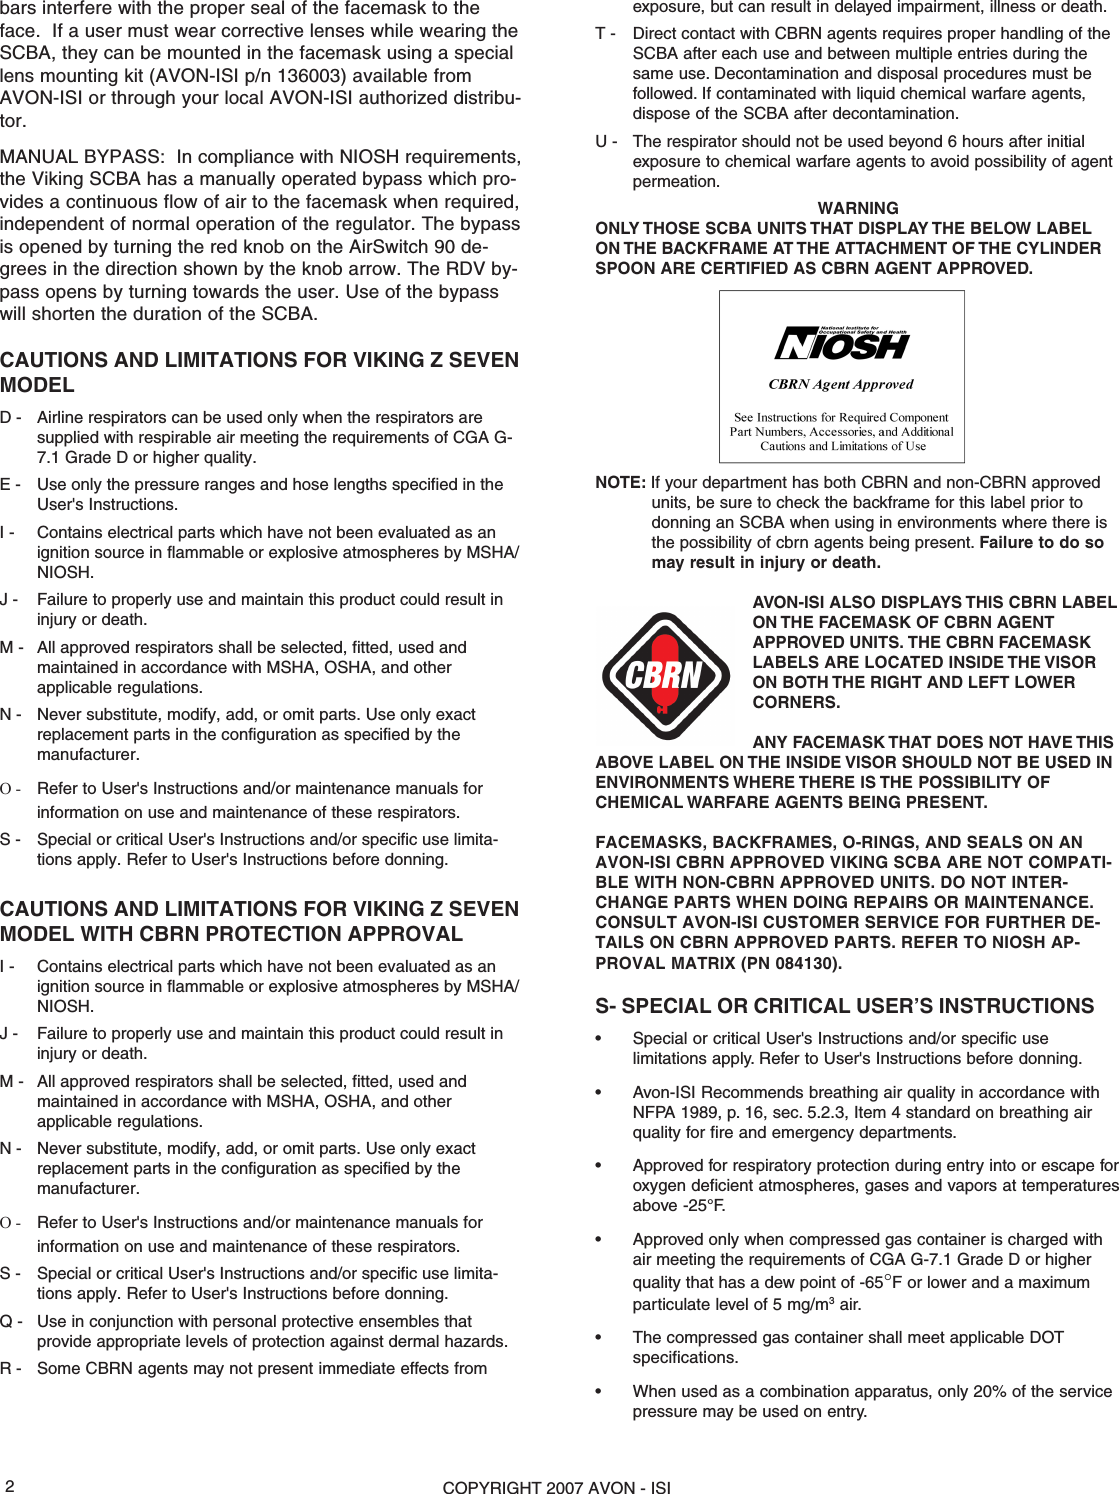 COPYRIGHT 2007 AVON - ISI2bars interfere with the proper seal of the facemask to theface.  If a user must wear corrective lenses while wearing theSCBA, they can be mounted in the facemask using a speciallens mounting kit (AVON-ISI p/n 136003) available fromAVON-ISI or through your local AVON-ISI authorized distribu-tor.MANUAL BYPASS:  In compliance with NIOSH requirements,the Viking SCBA has a manually operated bypass which pro-vides a continuous flow of air to the facemask when required,independent of normal operation of the regulator. The bypassis opened by turning the red knob on the AirSwitch 90 de-grees in the direction shown by the knob arrow. The RDV by-pass opens by turning towards the user. Use of the bypasswill shorten the duration of the SCBA.CAUTIONS AND LIMITATIONS FOR VIKING Z SEVENMODELD - Airline respirators can be used only when the respirators aresupplied with respirable air meeting the requirements of CGA G-7.1 Grade D or higher quality.E - Use only the pressure ranges and hose lengths specified in theUser&apos;s Instructions.I - Contains electrical parts which have not been evaluated as anignition source in flammable or explosive atmospheres by MSHA/NIOSH.J - Failure to properly use and maintain this product could result ininjury or death.M - All approved respirators shall be selected, fitted, used andmaintained in accordance with MSHA, OSHA, and otherapplicable regulations.N - Never substitute, modify, add, or omit parts. Use only exactreplacement parts in the configuration as specified by themanufacturer.O - Refer to User&apos;s Instructions and/or maintenance manuals forinformation on use and maintenance of these respirators.S - Special or critical User&apos;s Instructions and/or specific use limita-tions apply. Refer to User&apos;s Instructions before donning.CAUTIONS AND LIMITATIONS FOR VIKING Z SEVENMODEL WITH CBRN PROTECTION APPROVALI - Contains electrical parts which have not been evaluated as anignition source in flammable or explosive atmospheres by MSHA/NIOSH.J - Failure to properly use and maintain this product could result ininjury or death.M - All approved respirators shall be selected, fitted, used andmaintained in accordance with MSHA, OSHA, and otherapplicable regulations.N - Never substitute, modify, add, or omit parts. Use only exactreplacement parts in the configuration as specified by themanufacturer.O - Refer to User&apos;s Instructions and/or maintenance manuals forinformation on use and maintenance of these respirators.S - Special or critical User&apos;s Instructions and/or specific use limita-tions apply. Refer to User&apos;s Instructions before donning.Q - Use in conjunction with personal protective ensembles thatprovide appropriate levels of protection against dermal hazards.R - Some CBRN agents may not present immediate effects fromexposure, but can result in delayed impairment, illness or death.T - Direct contact with CBRN agents requires proper handling of theSCBA after each use and between multiple entries during thesame use. Decontamination and disposal procedures must befollowed. If contaminated with liquid chemical warfare agents,dispose of the SCBA after decontamination.U - The respirator should not be used beyond 6 hours after initialexposure to chemical warfare agents to avoid possibility of agentpermeation.WARNINGONLY THOSE SCBA  UNITS THAT DISPLAY THE BELOW LABELON THE BACKFRAME AT THE  ATTACHMENT OF THE CYLINDERSPOON ARE CERTIFIED AS CBRN AGENT APPROVED.NOTE: If your department has both CBRN and non-CBRN approvedunits, be sure to check the backframe for this label prior todonning an SCBA when using in environments where there isthe possibility of cbrn agents being present. Failure to do somay result in injury or death.AVON-ISI ALSO DISPLAYS THIS CBRN LABELON THE FACEMASK OF CBRN AGENTAPPROVED UNITS. THE CBRN FACEMASKLABELS ARE LOCATED INSIDE THE VISORON BOTH THE RIGHT AND LEFT LOWERCORNERS.ANY FACEMASK THAT DOES NOT HAVE THISABOVE LABEL ON THE INSIDE VISOR SHOULD NOT BE USED INENVIRONMENTS WHERE THERE IS THE POSSIBILITY OFCHEMICAL WARFARE AGENTS BEING PRESENT.FACEMASKS, BACKFRAMES, O-RINGS, AND SEALS ON ANAVON-ISI CBRN APPROVED VIKING SCBA ARE NOT COMPATI-BLE WITH NON-CBRN APPROVED UNITS. DO NOT INTER-CHANGE PARTS WHEN DOING REPAIRS OR MAINTENANCE.CONSULT AVON-ISI CUSTOMER SERVICE FOR FURTHER DE-TAILS ON CBRN APPROVED PARTS. REFER TO NIOSH AP-PROVAL MATRIX (PN 084130).S- SPECIAL OR CRITICAL USER’S INSTRUCTIONS• Special or critical User&apos;s Instructions and/or specific uselimitations apply. Refer to User&apos;s Instructions before donning.• Avon-ISI Recommends breathing air quality in accordance withNFPA 1989, p. 16, sec. 5.2.3, Item 4 standard on breathing airquality for fire and emergency departments.• Approved for respiratory protection during entry into or escape foroxygen deficient atmospheres, gases and vapors at temperaturesabove -25°F.• Approved only when compressed gas container is charged withair meeting the requirements of CGA G-7.1 Grade D or higherquality that has a dew point of -65°F or lower and a maximumparticulate level of 5 mg/m3 air.• The compressed gas container shall meet applicable DOTspecifications.• When used as a combination apparatus, only 20% of the servicepressure may be used on entry.